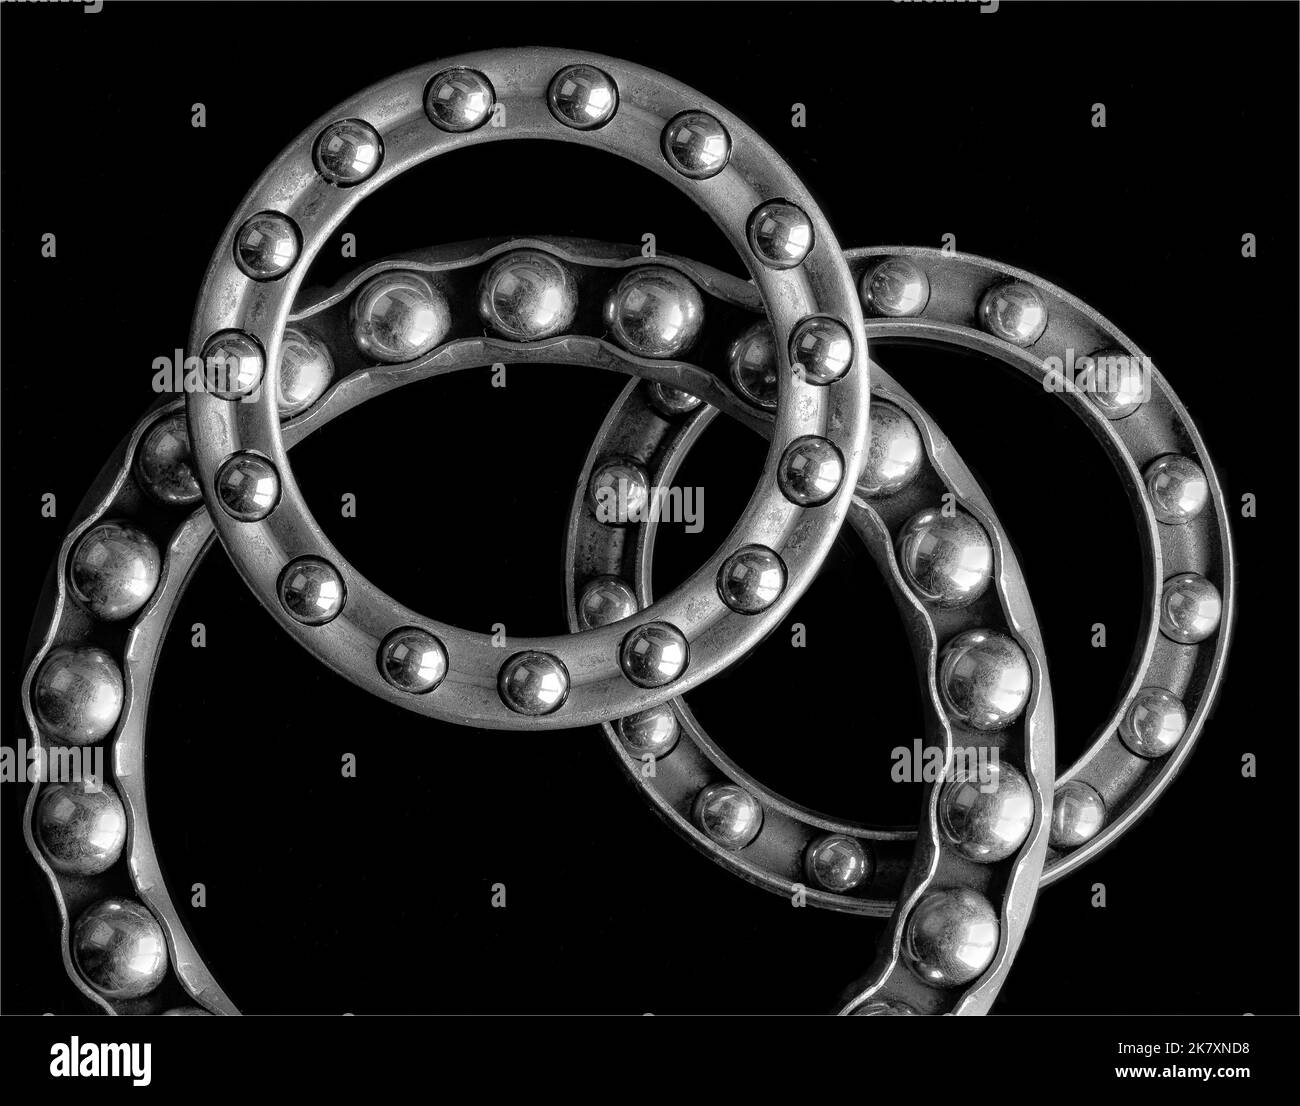 Ball bearings with black background Stock Photo